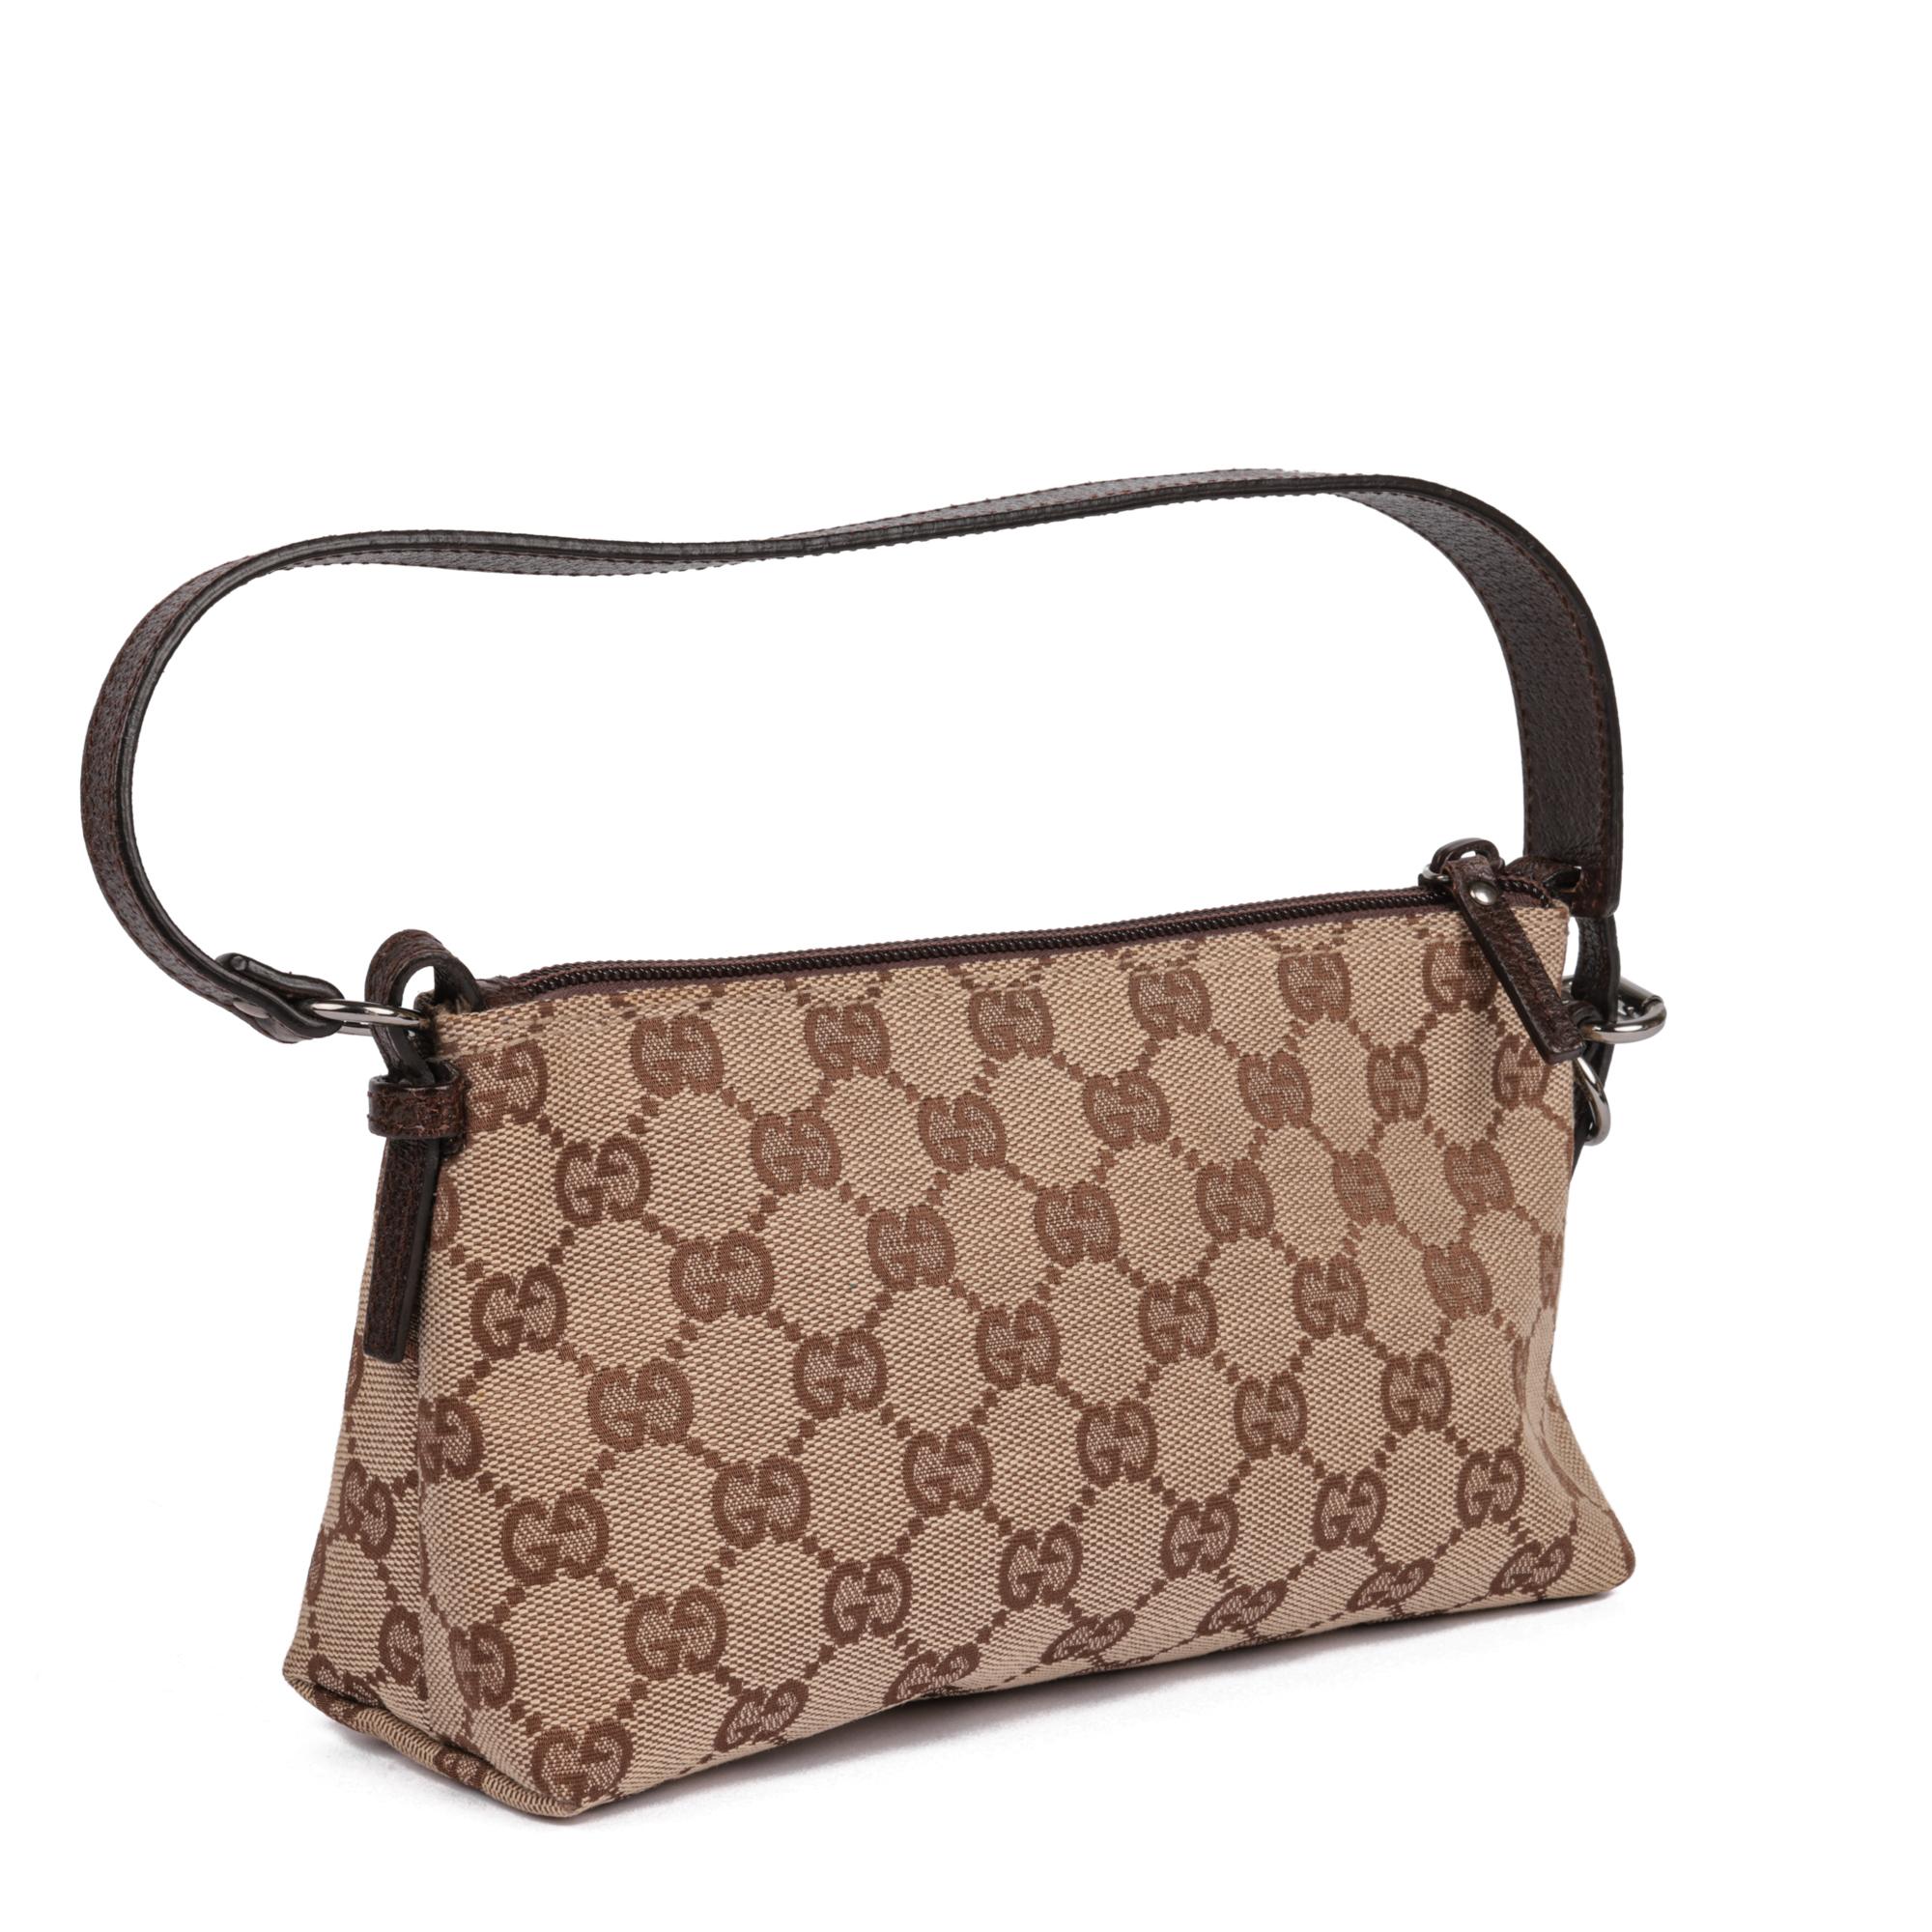 GUCCI
Beige GG Canvas & Brown Calfskin Leather Vintage Small Pochette

Xupes Reference: CB889
Serial Number: 103399 002404
Age (Circa): 2000
Accompanied By: Gucci Dust Bag
Authenticity Details: Date Stamp (Made in Italy)
Gender: Ladies
Type: Top